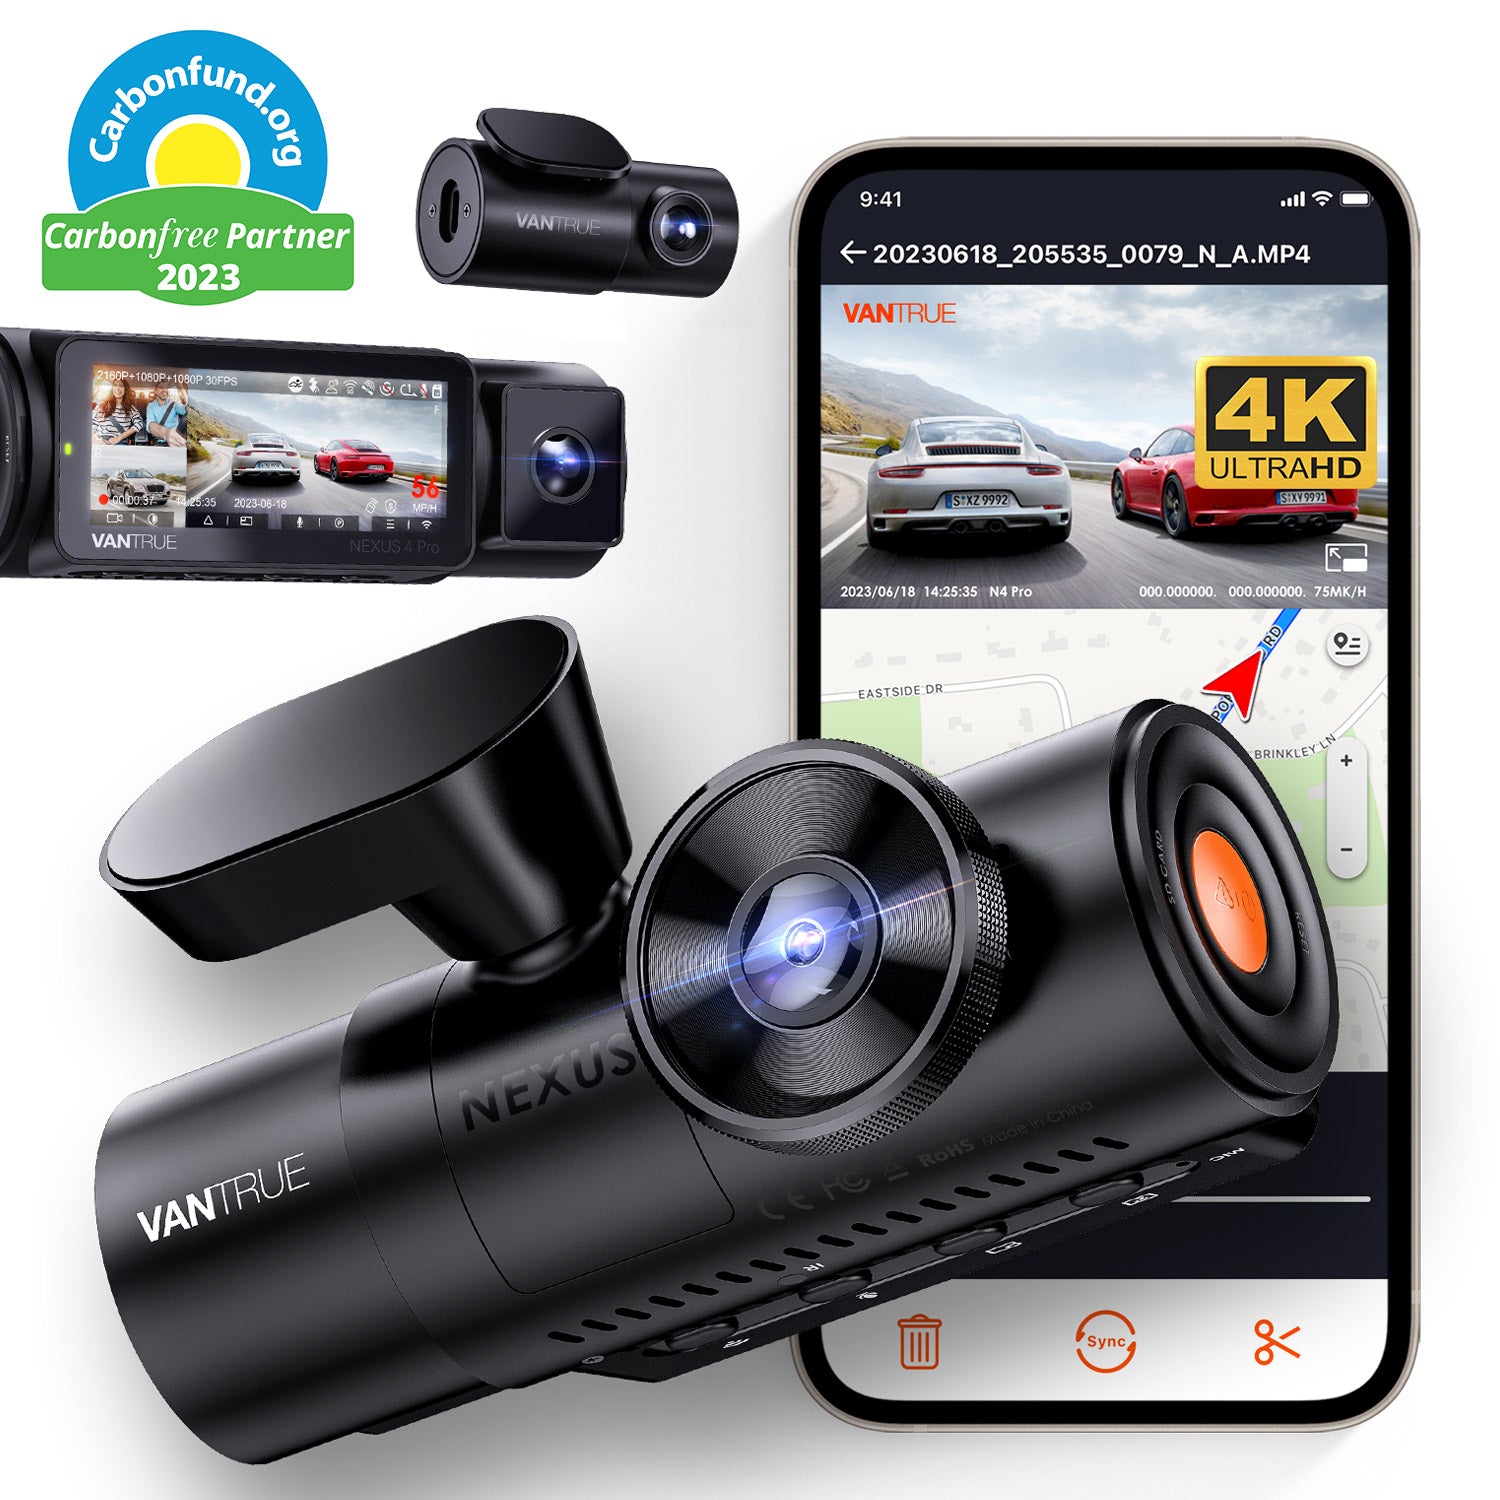 Dashcam Pro N with Parking Monitoring, For Security